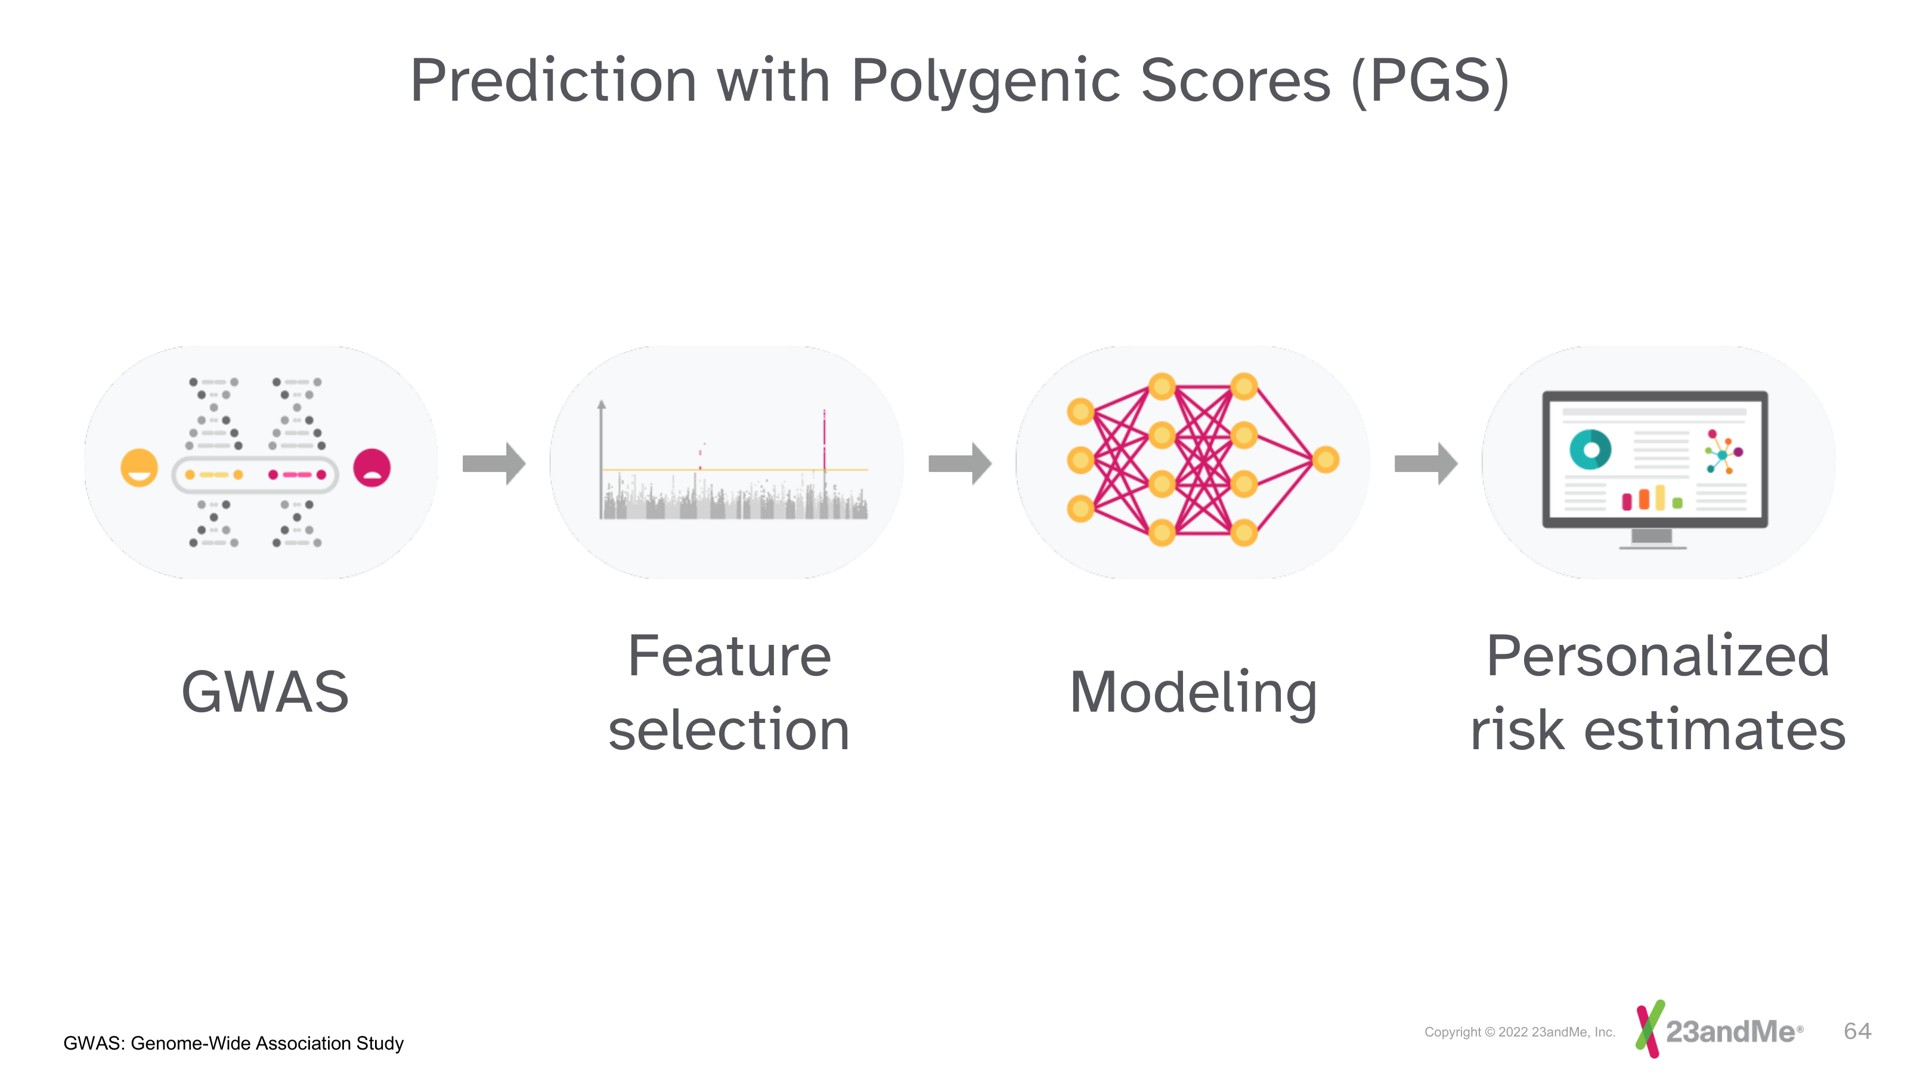 prediction with polygenic scores feature selection modeling personalized risk estimates | 23andMe